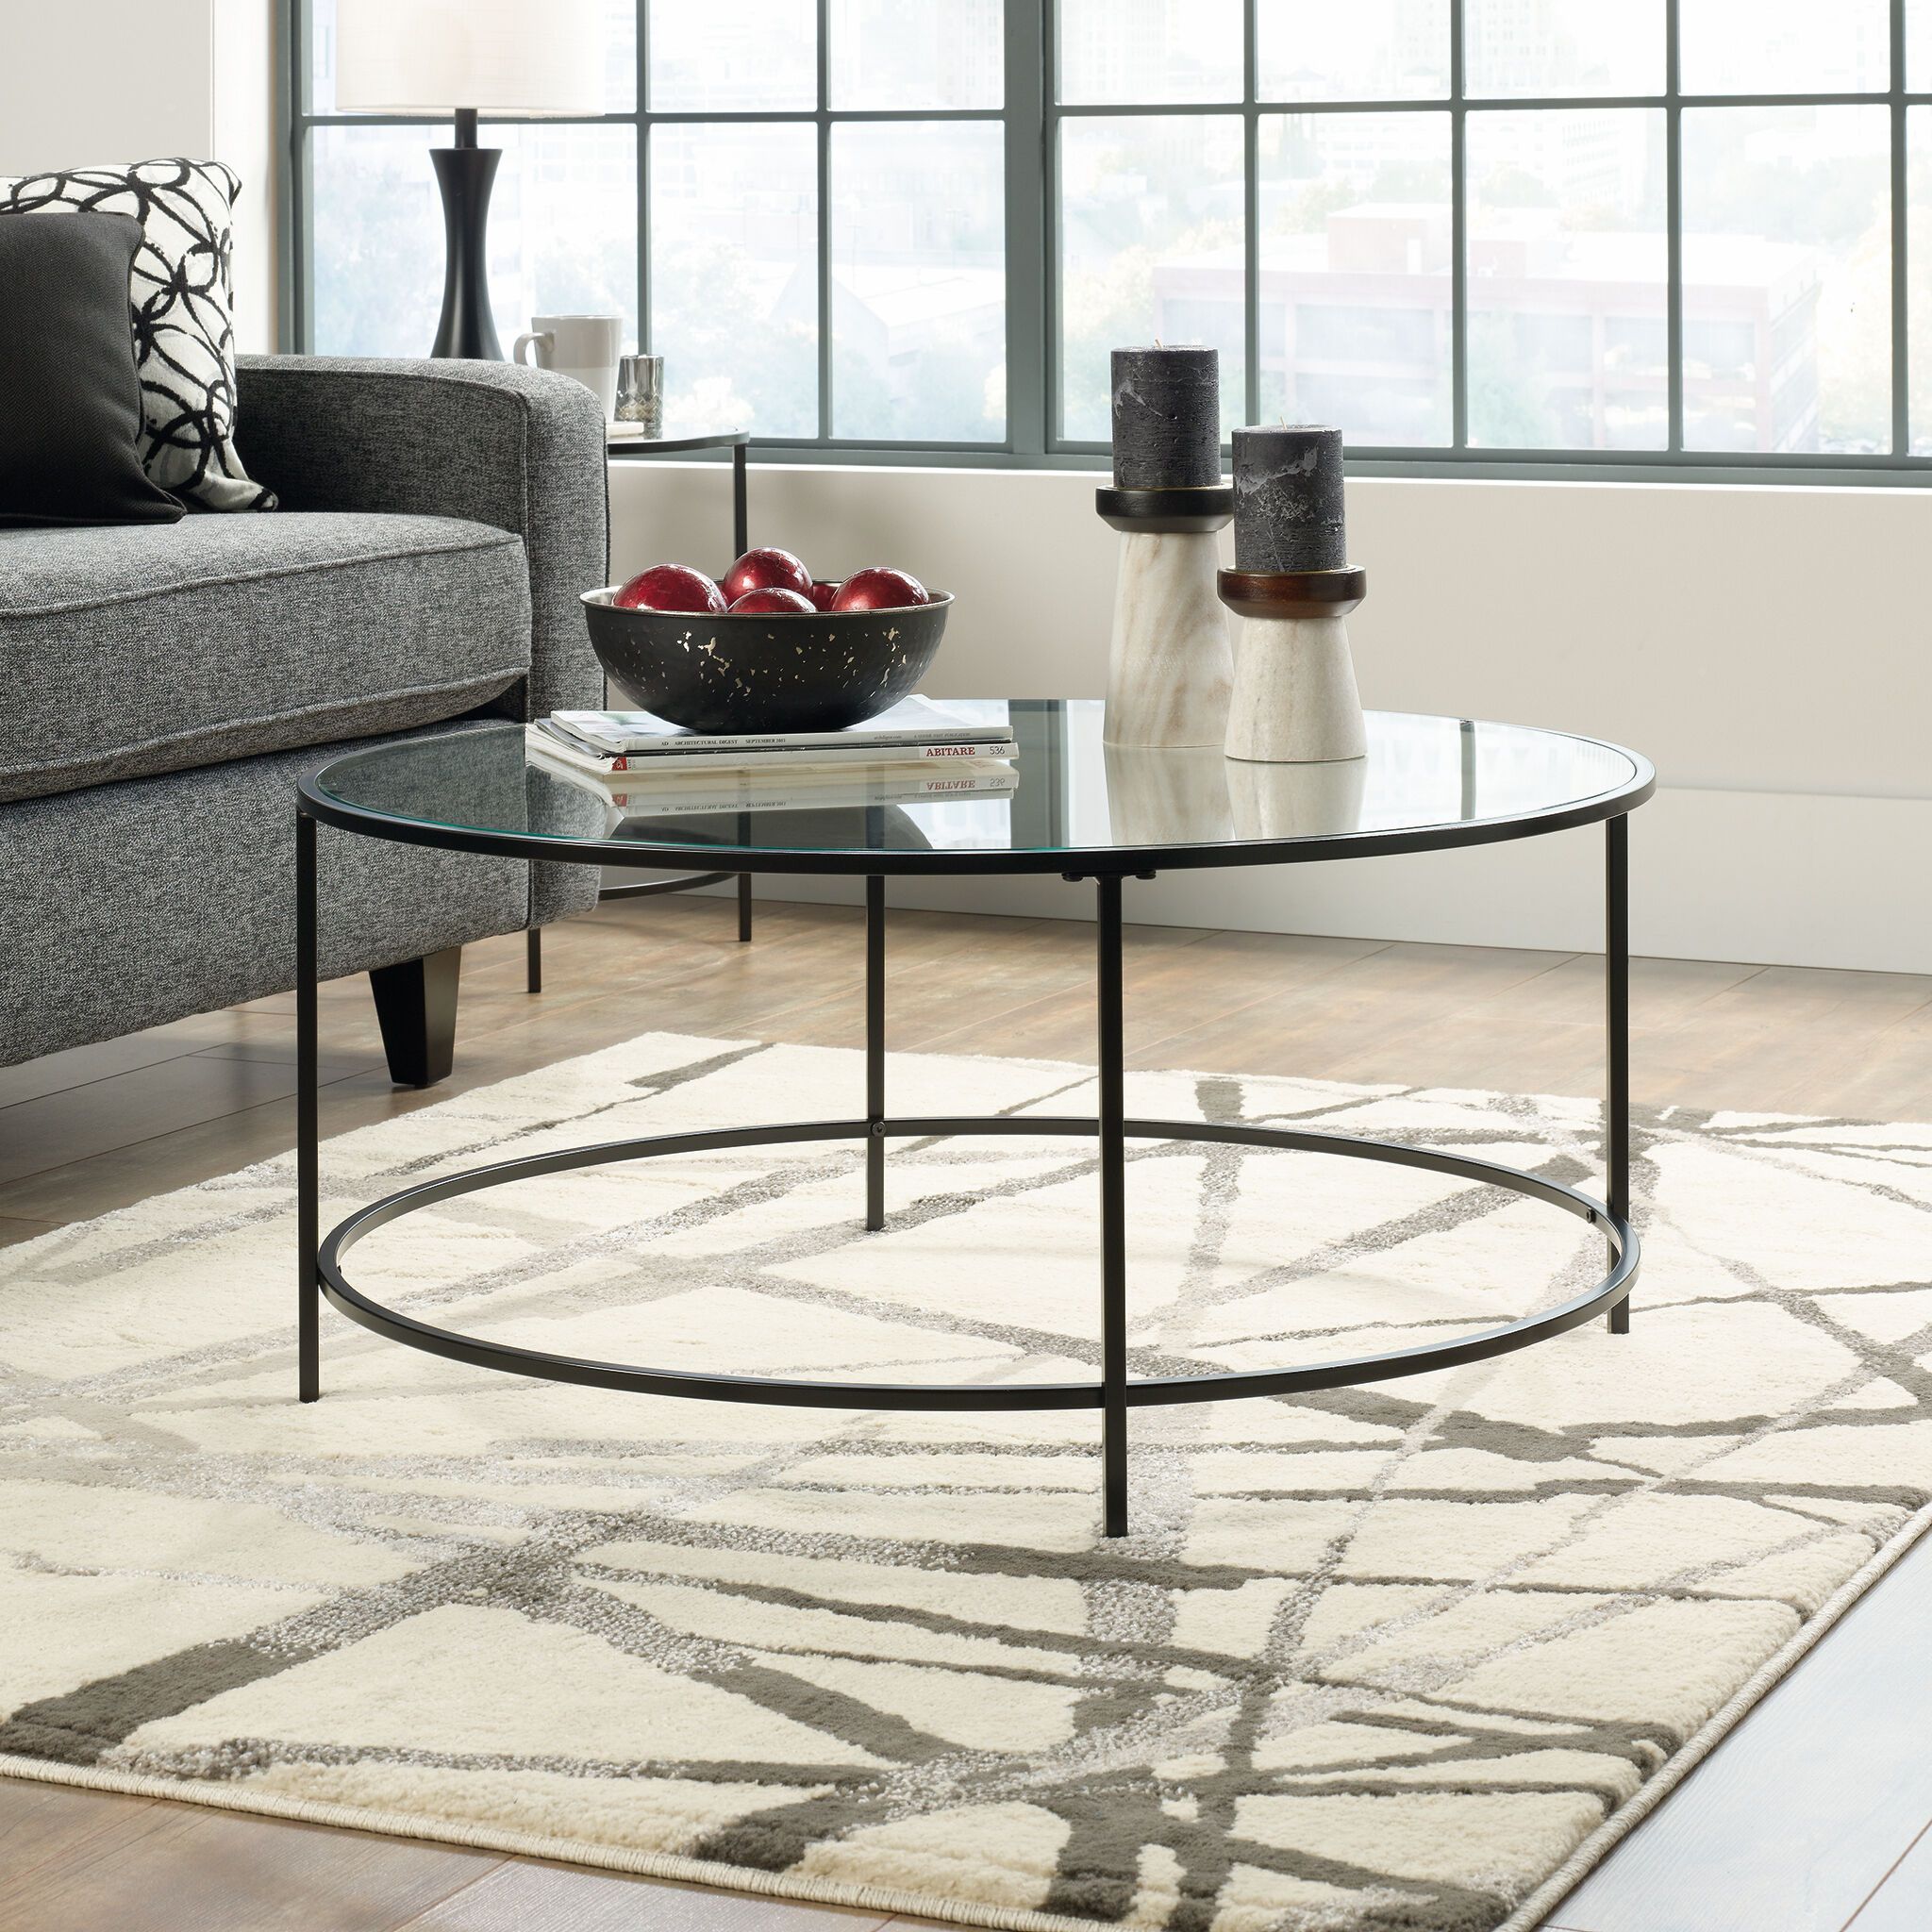 Round Contemporary Coffee Table In Black | Mathis Brothers Furniture With Full Black Round Coffee Tables (Gallery 1 of 20)